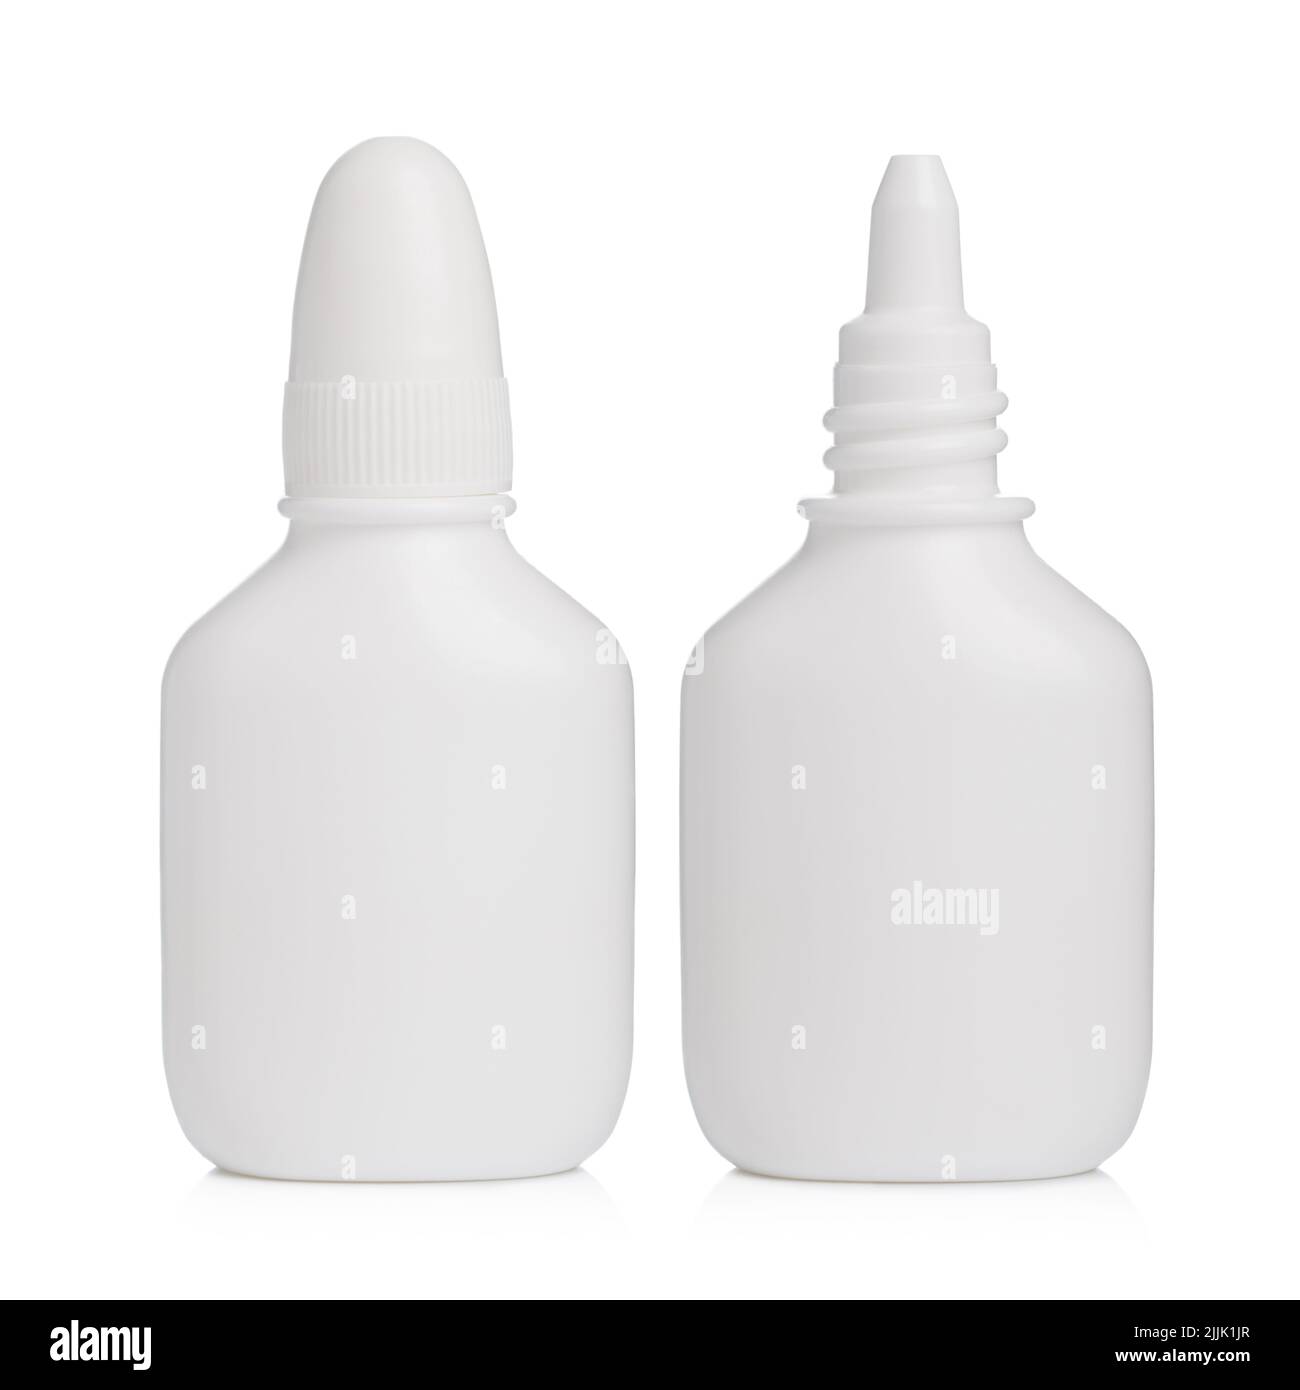 Nasal spray bottle Cut Out Stock Images & Pictures - Alamy